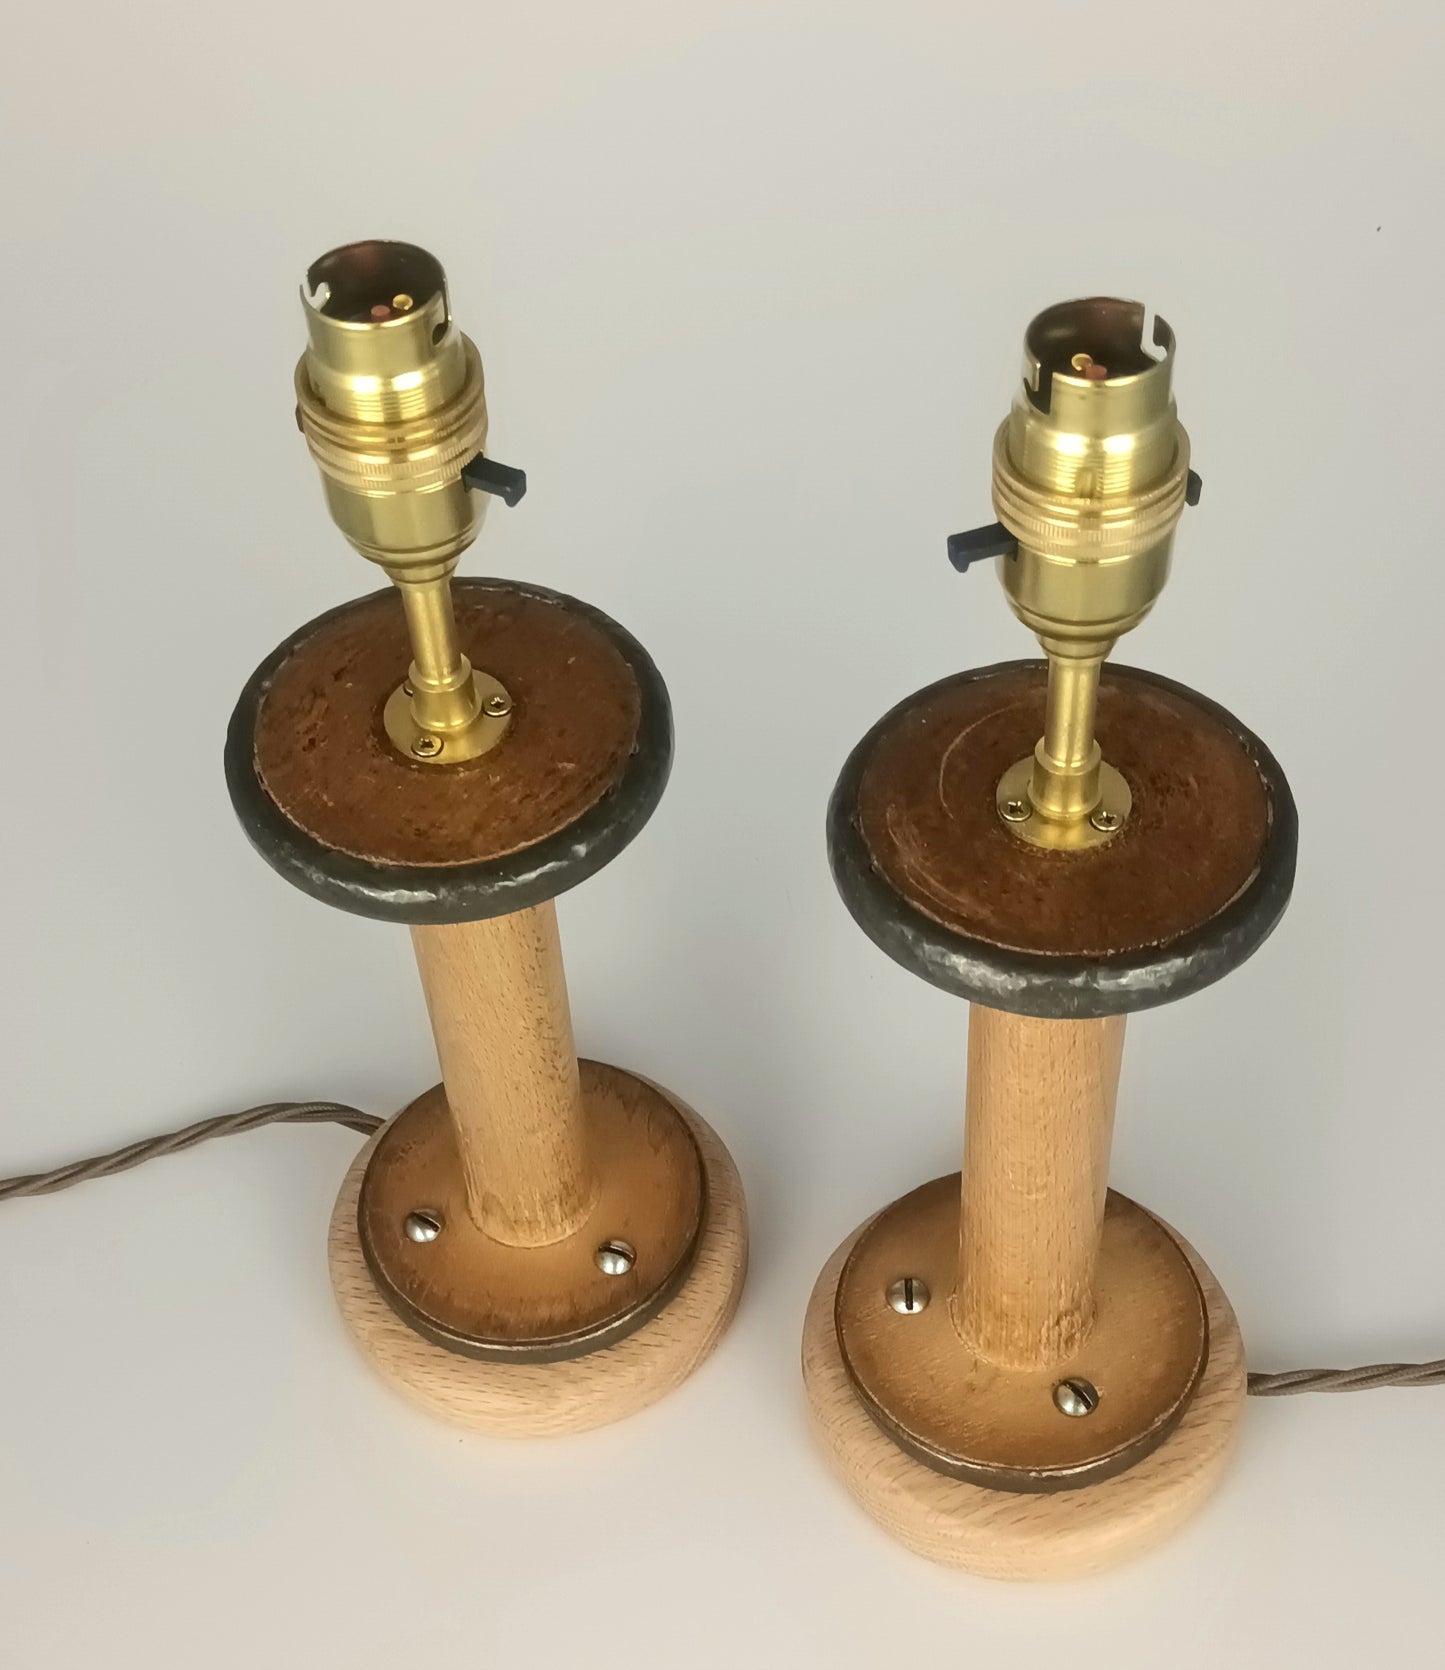 Lamp base's -  constructed using Vintage Industrial Cotton Bobbins